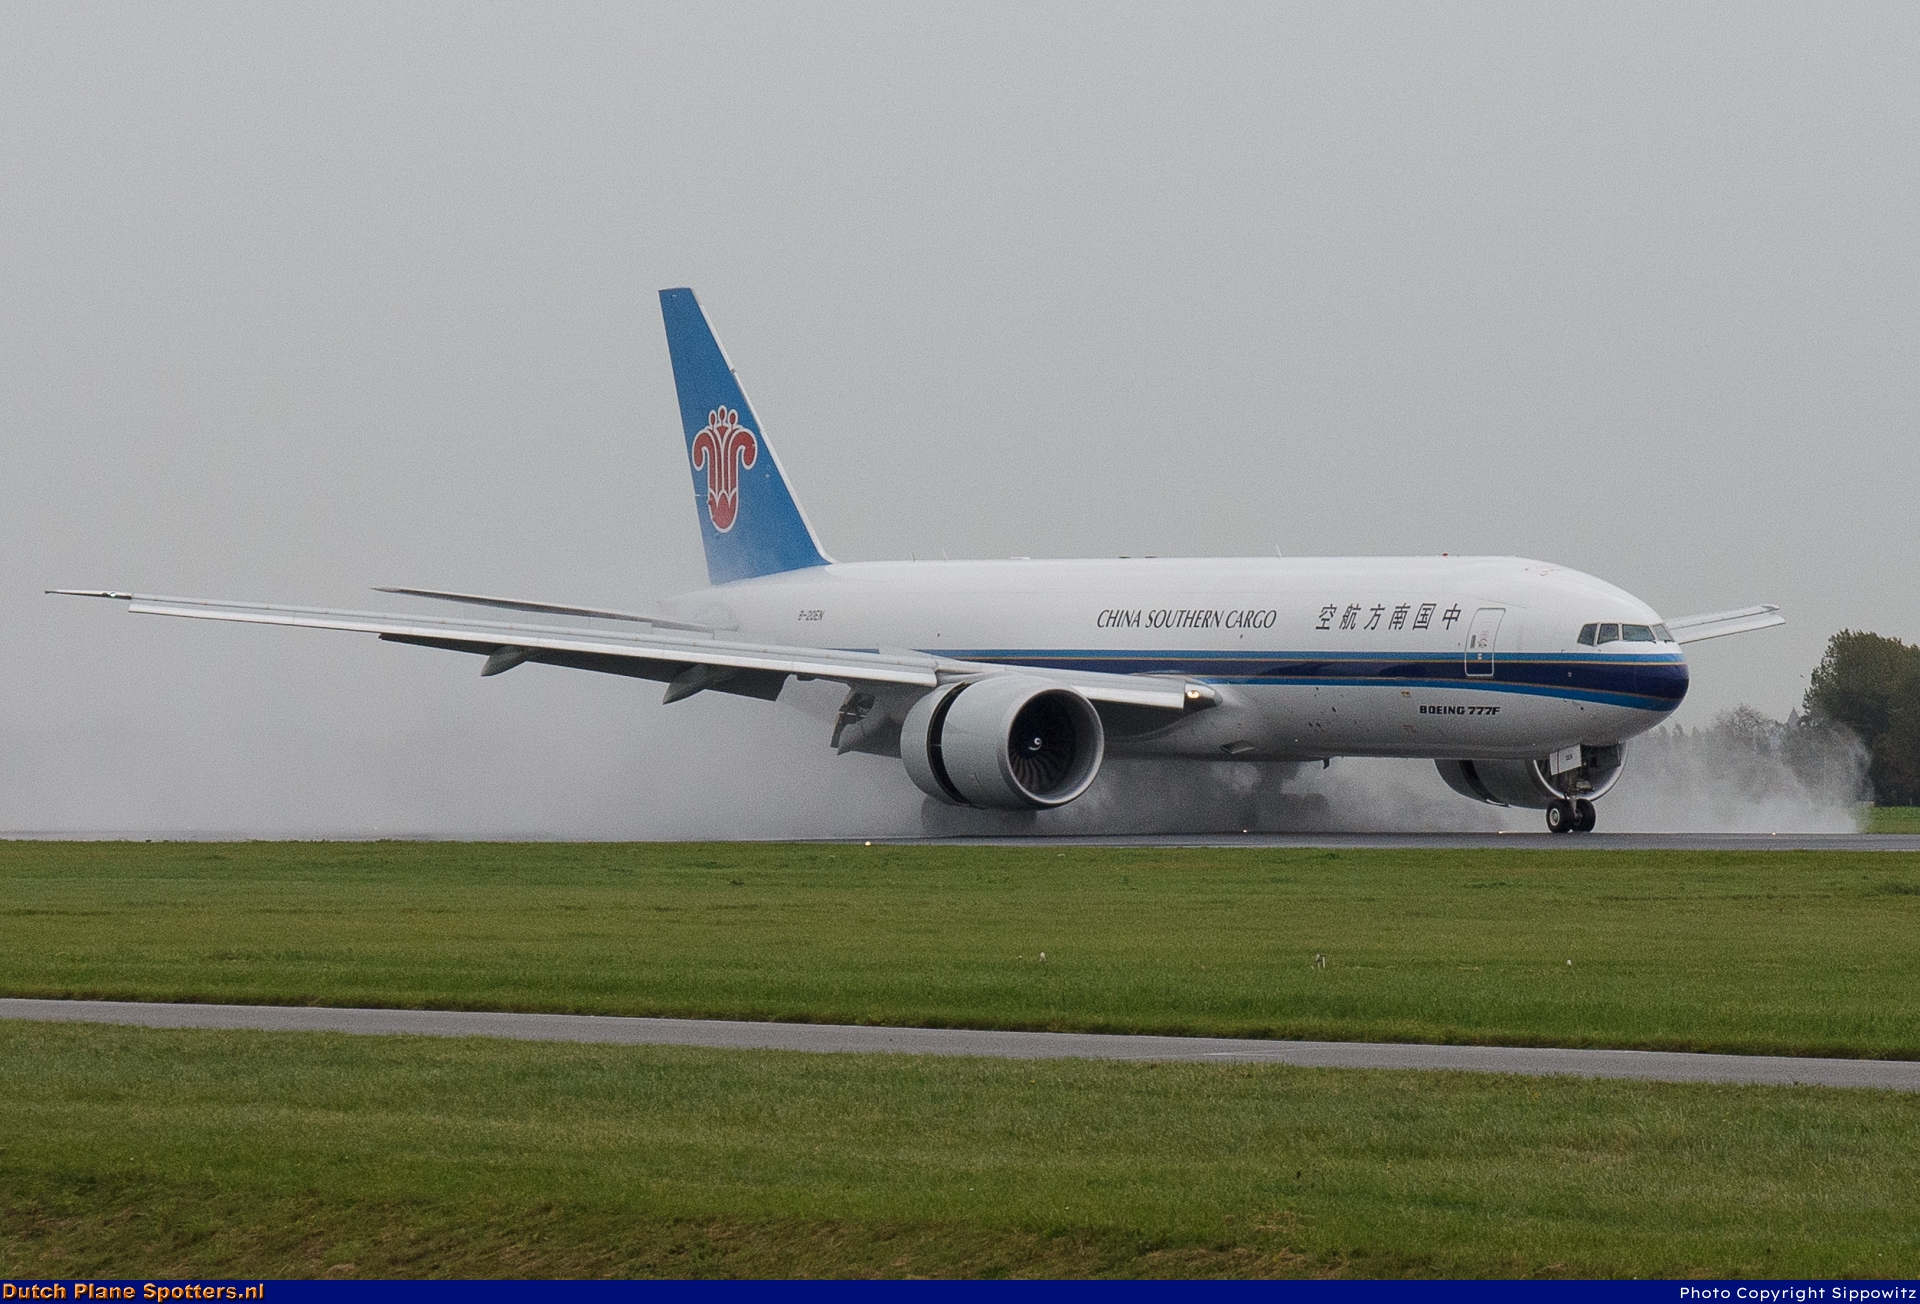 B-20EN Boeing 777-F China Southern Cargo by Sippowitz